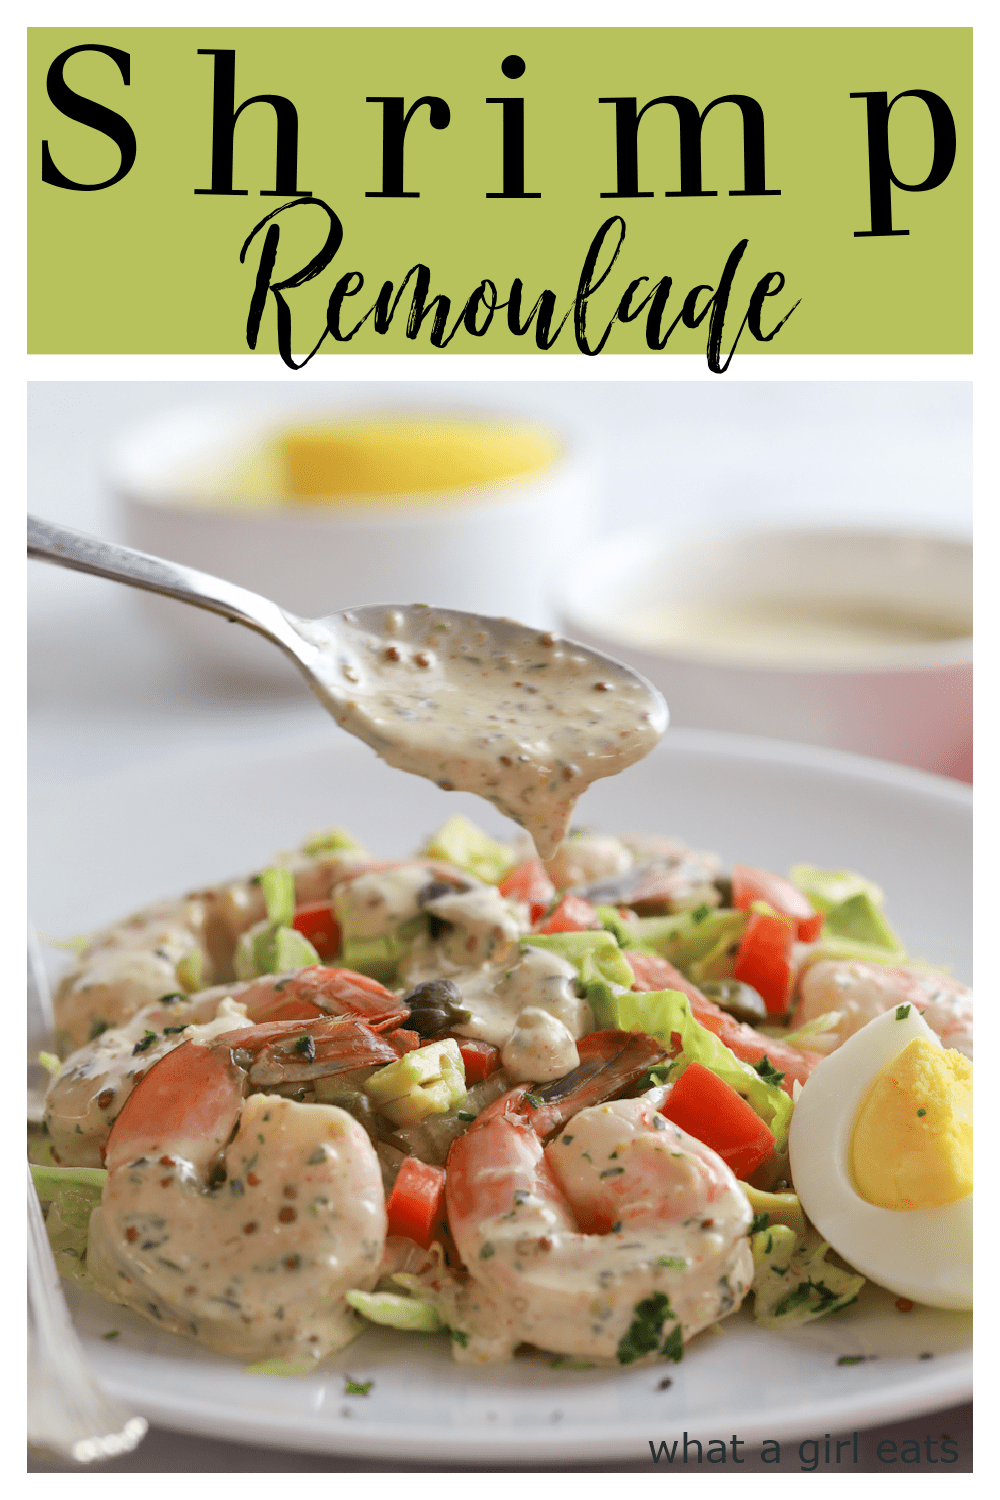 Shrimp remoulade is a classic Southern dish popular in New Orleans, that's great as a salad, or as a first course appetizer.